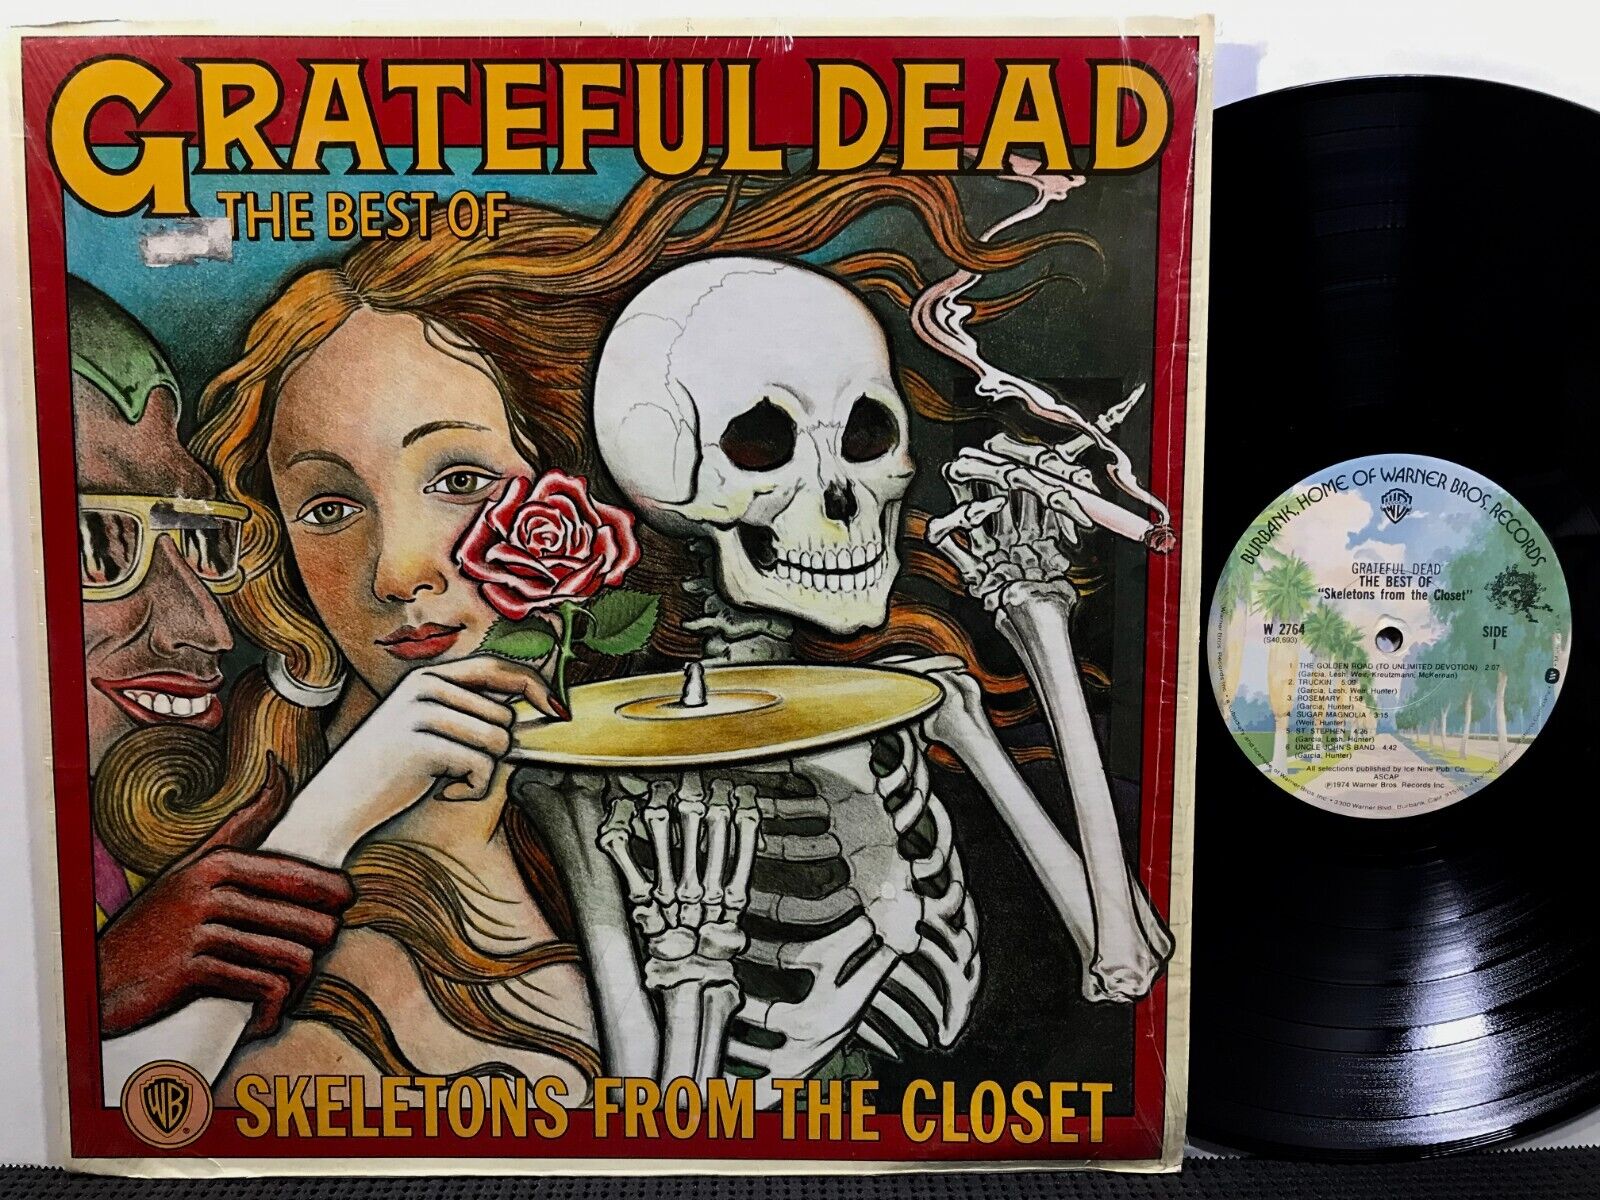 GRATEFUL DEAD Skeletons From The Closet LP WB W2764 STEREO 1974 Psych Rock